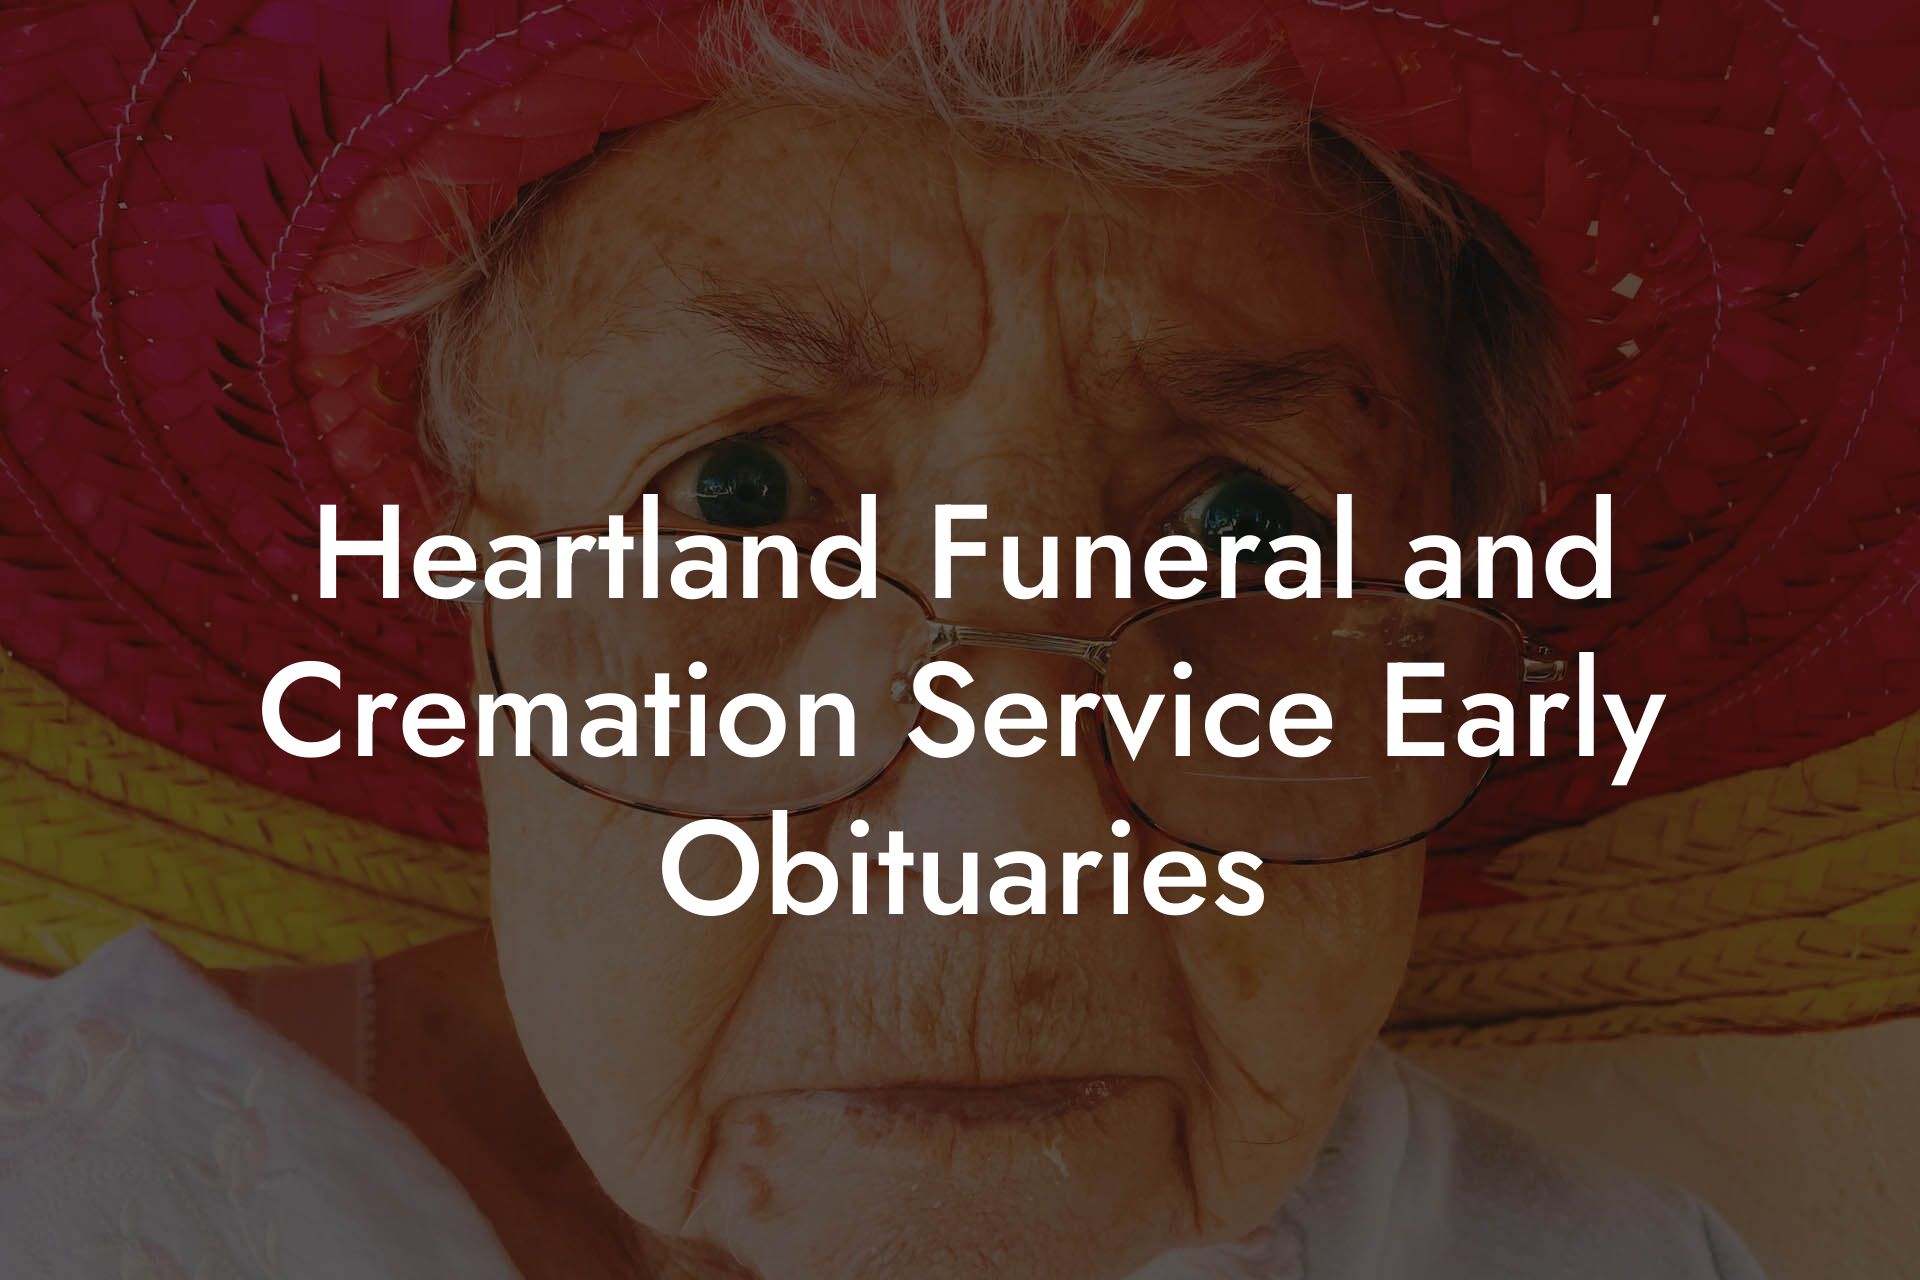 Heartland Funeral and Cremation Service Early Obituaries